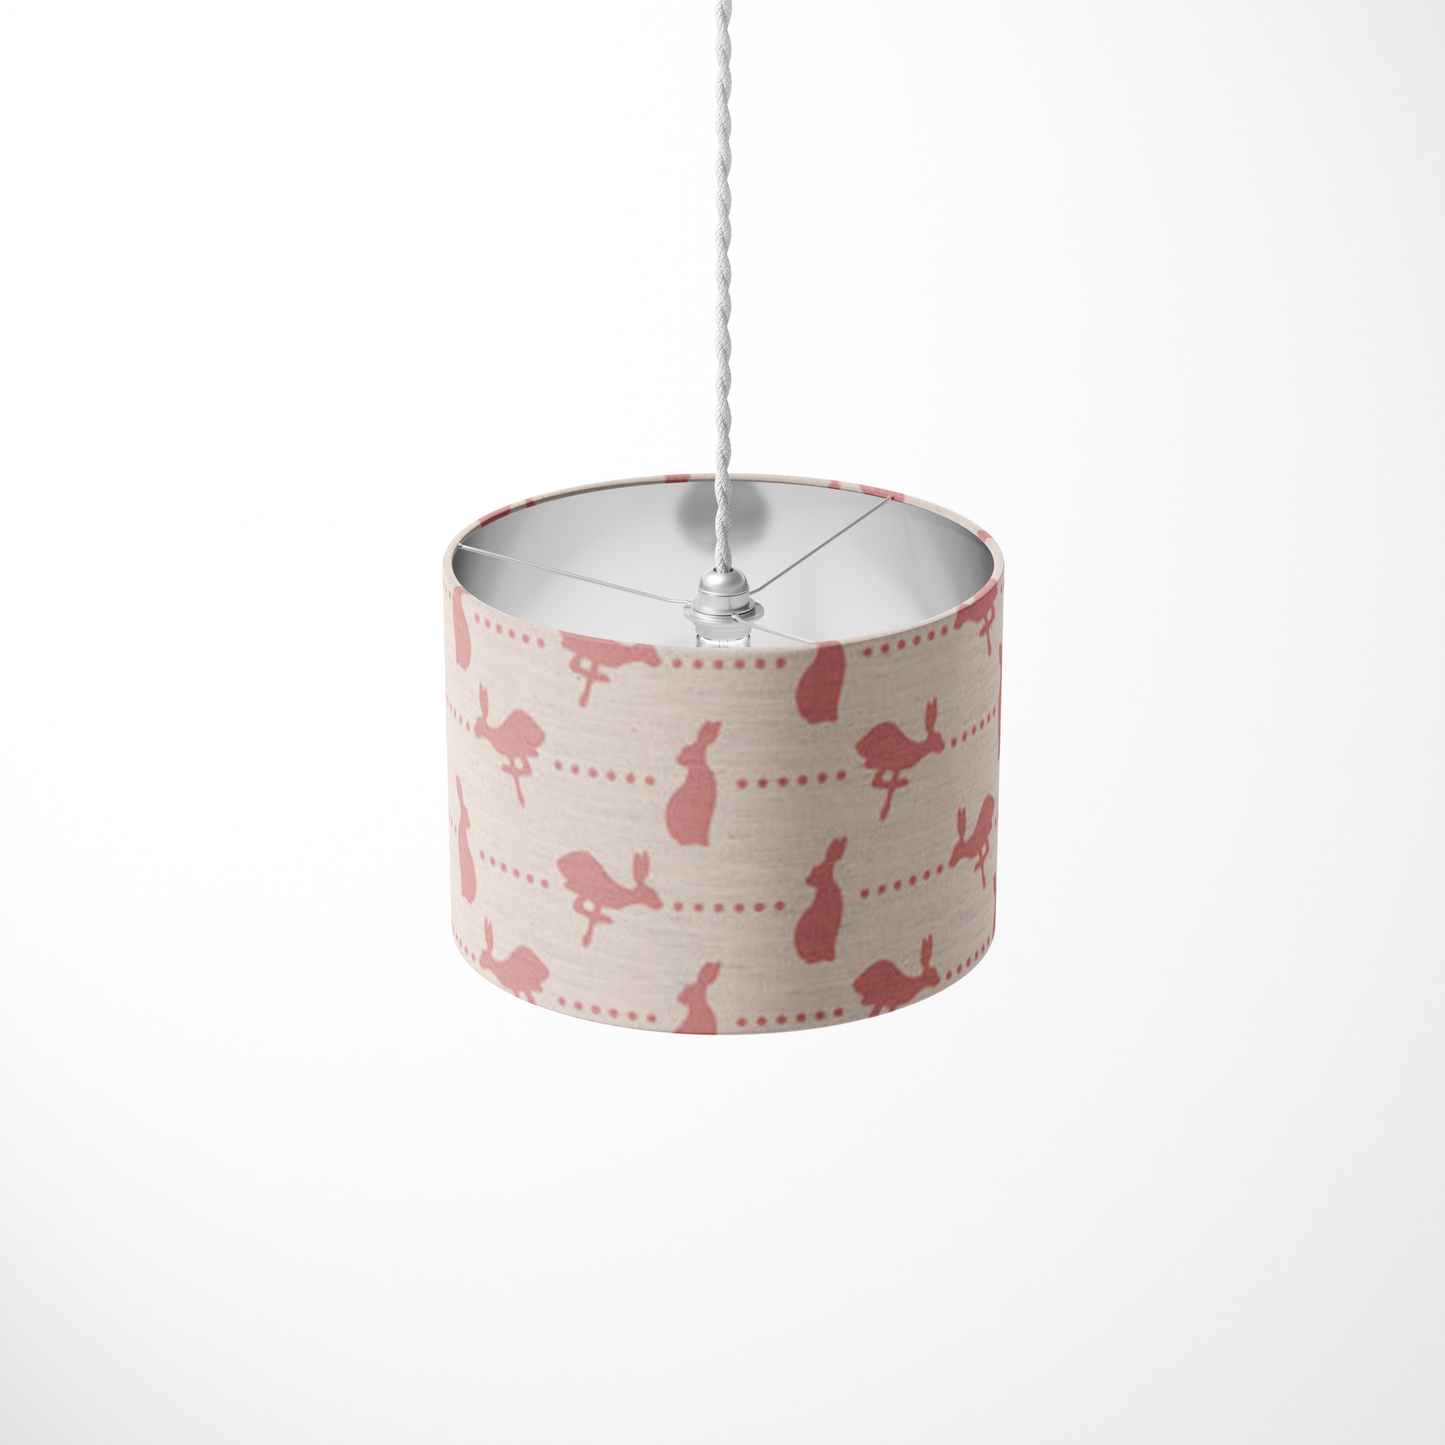 F&B Hare & Dots Print Fabric Lampshade on Organic Cotton - Handmade in Yorkshire by F&B